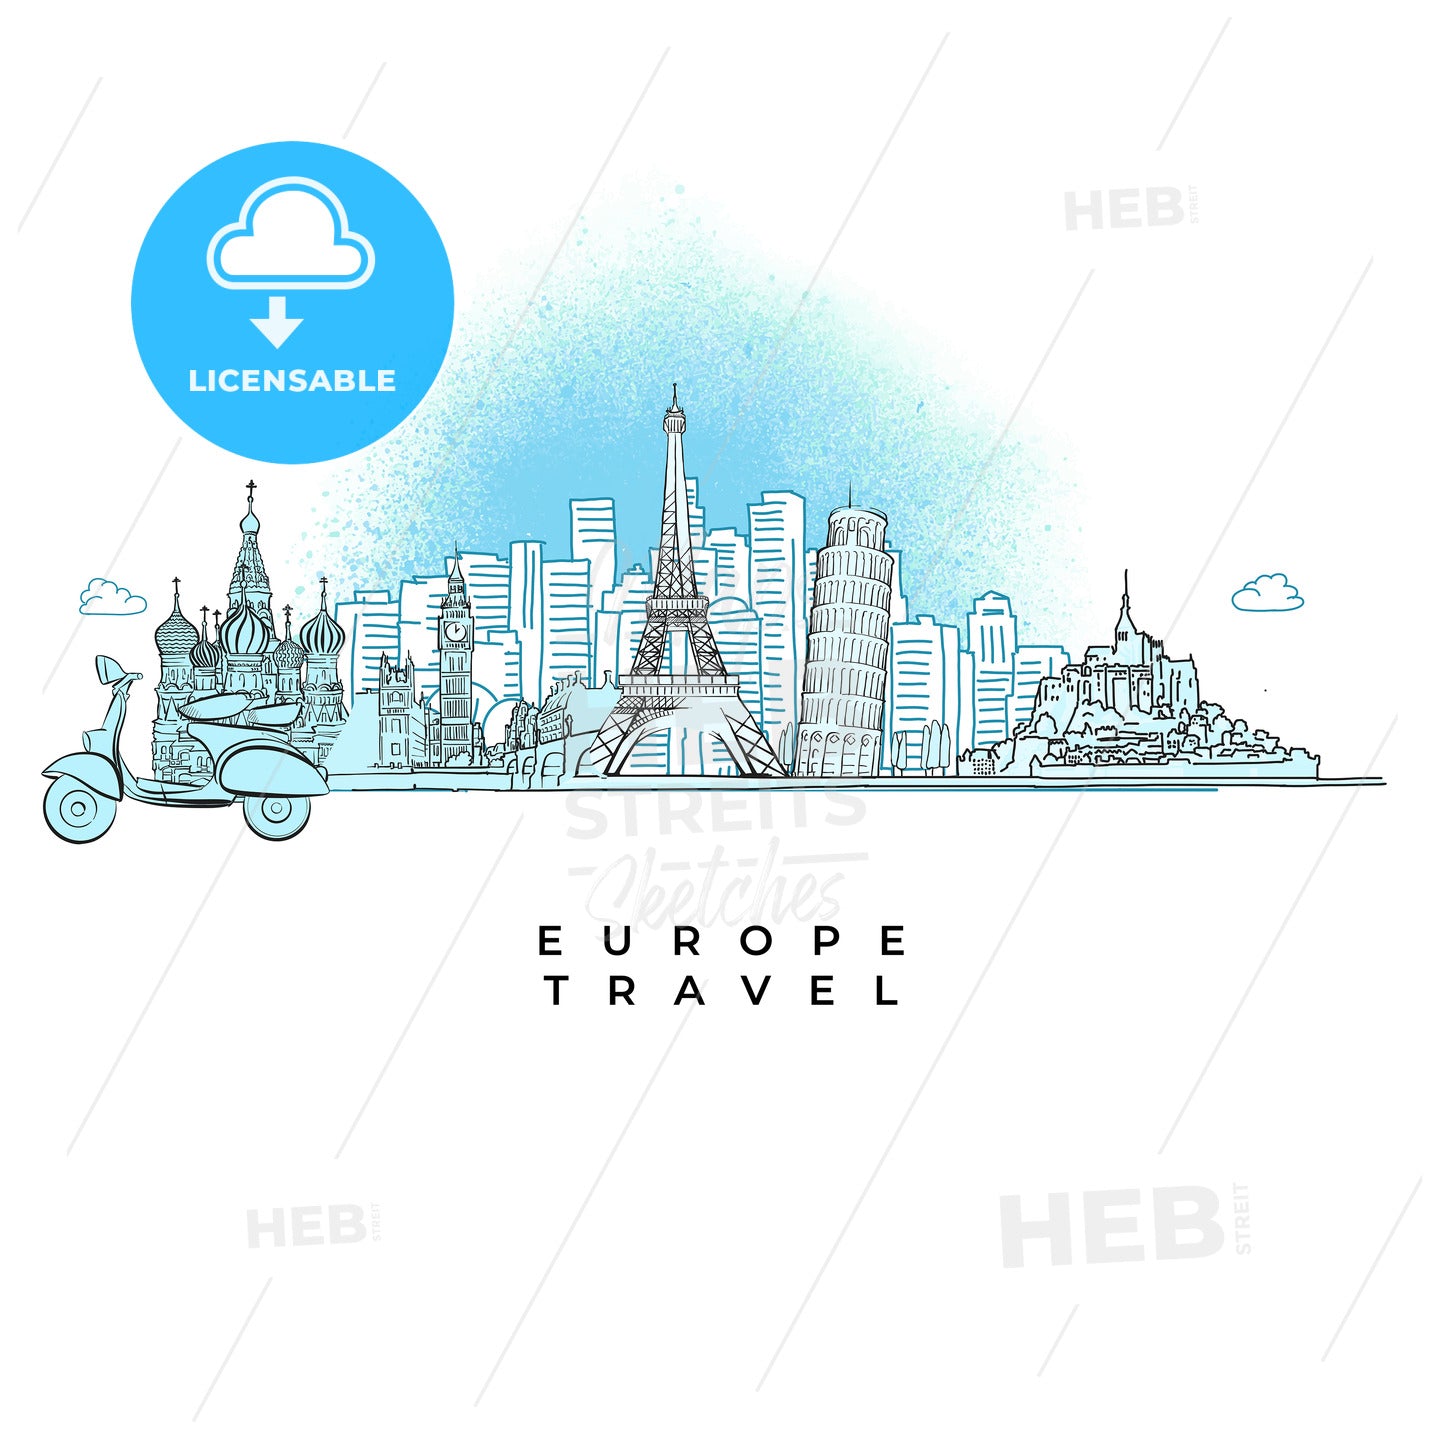 Europe Travel concept City skyline – instant download